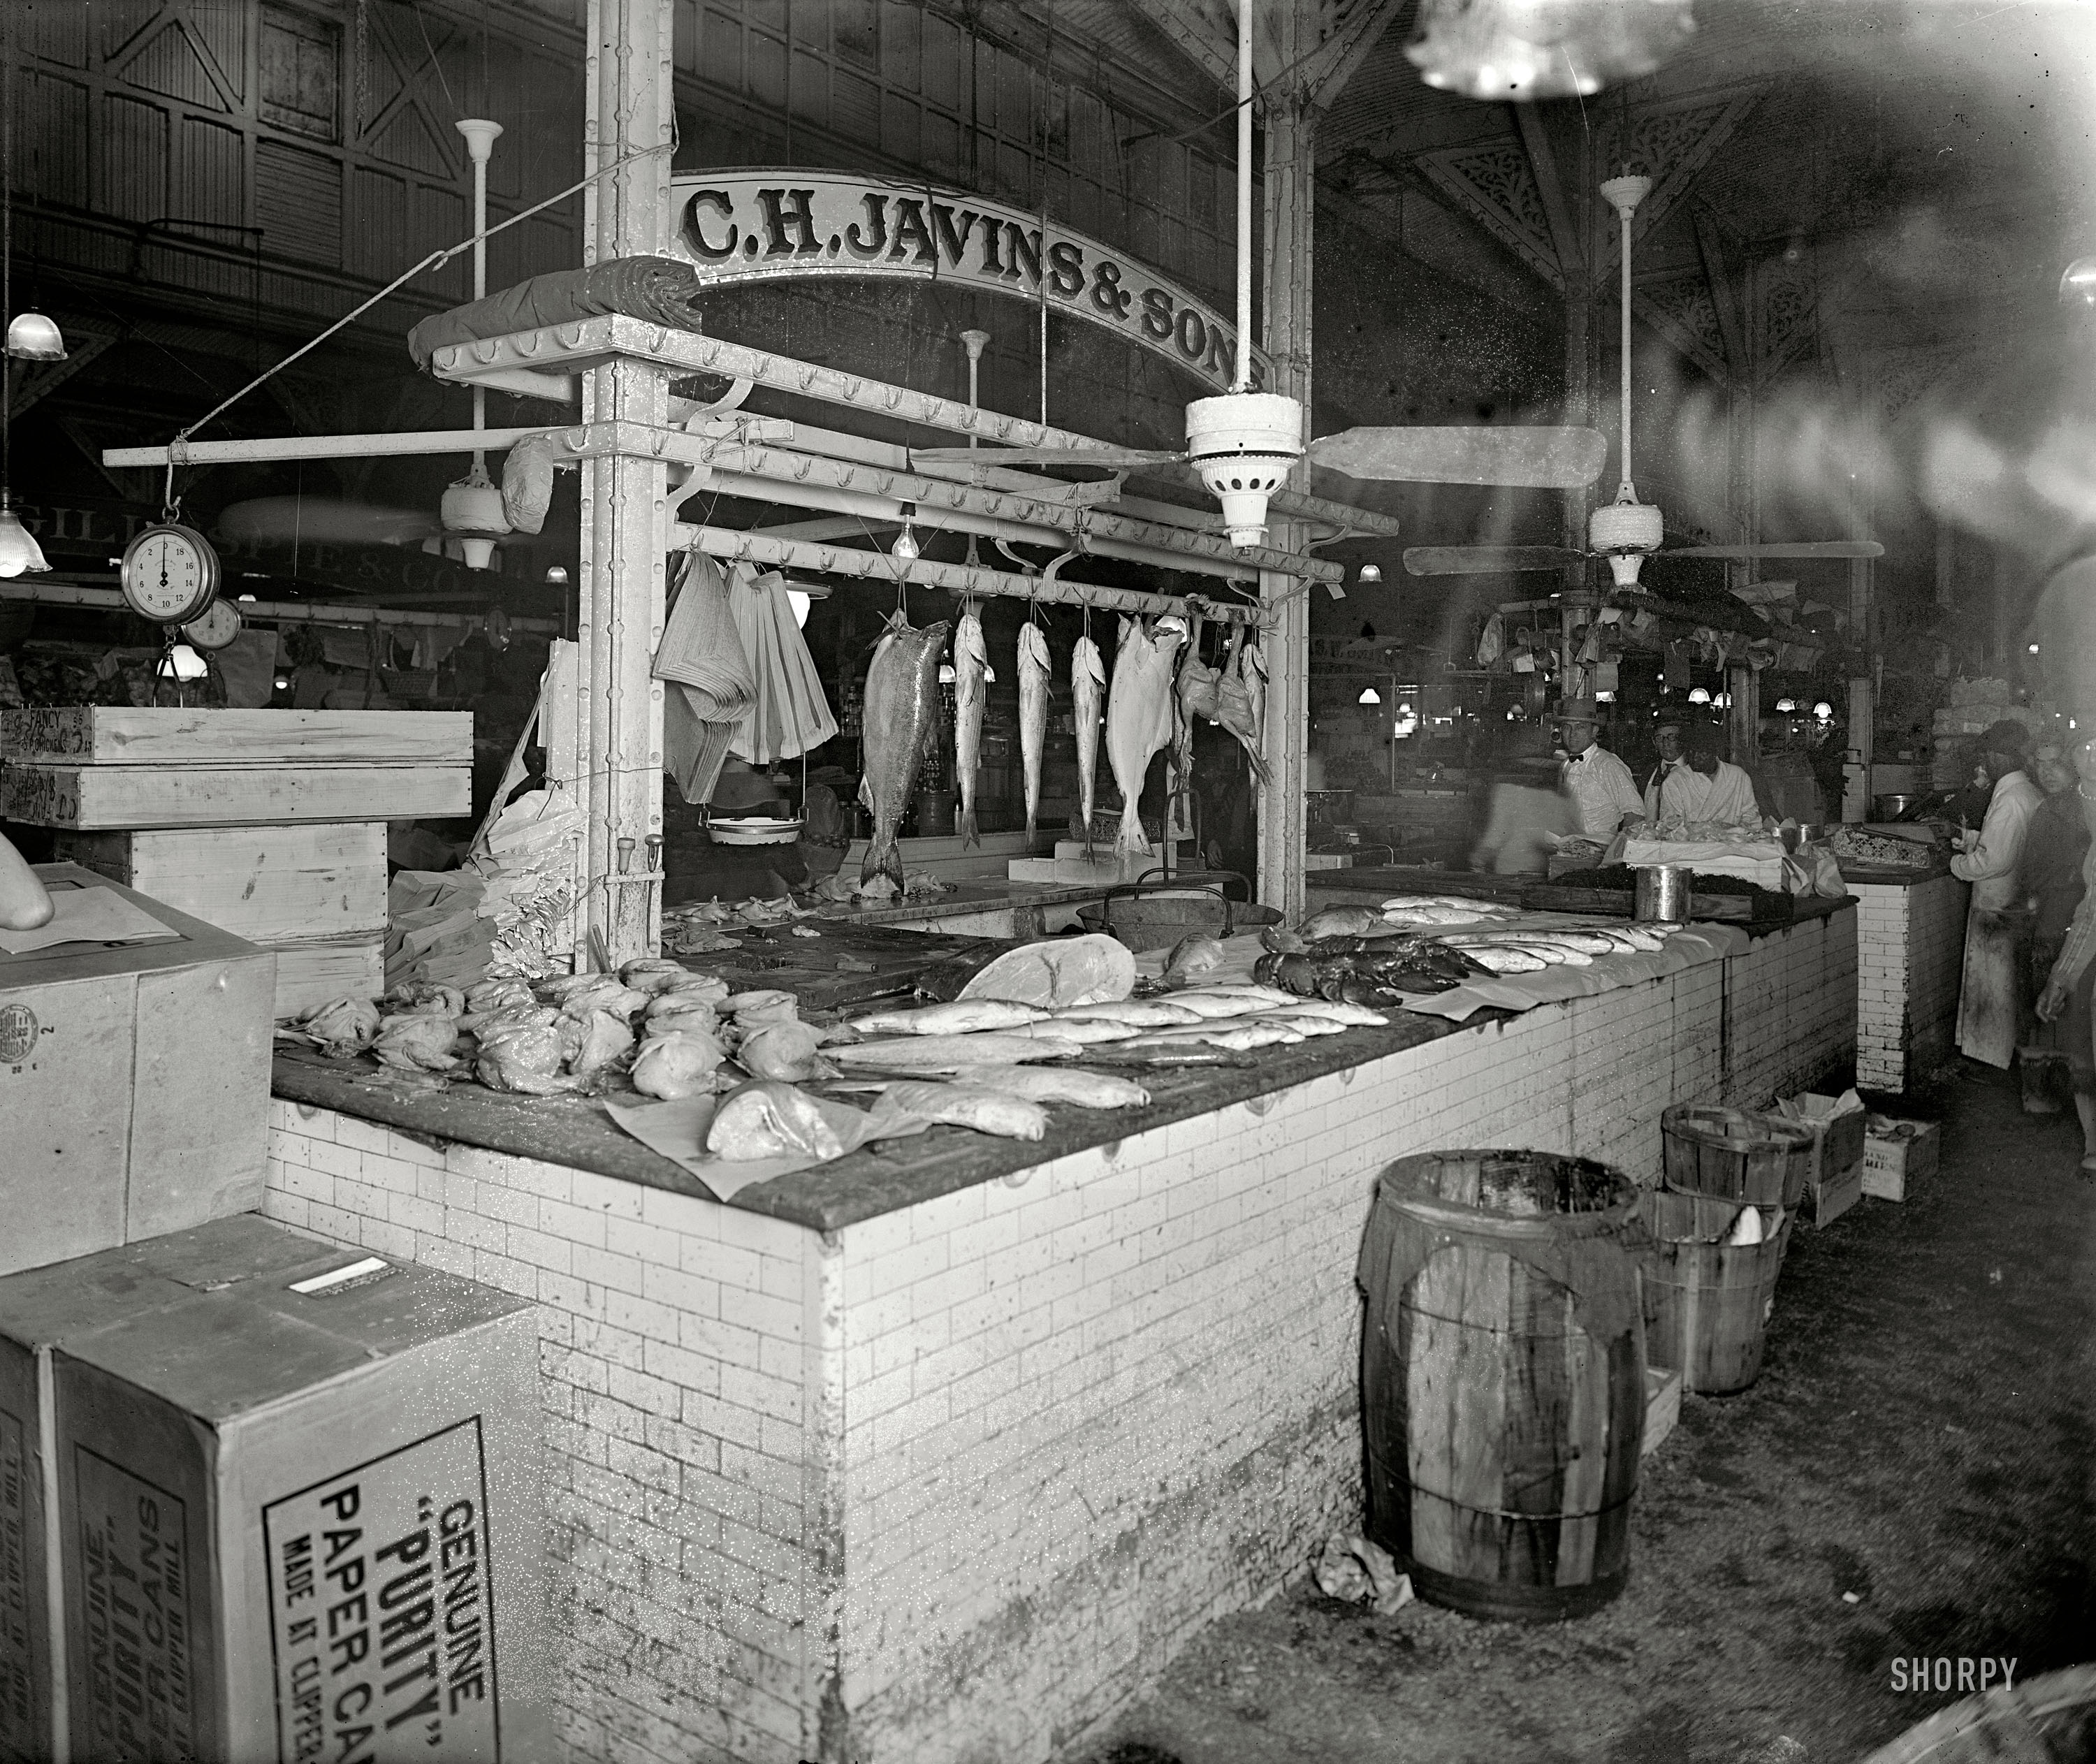 September 1926. "Thos. R. Shipp Co. -- C.H. Javins stand." The Charles Javins seafood stand in our second look today at Washington's old Center Market. National Photo Company Collection glass negative. View full size.